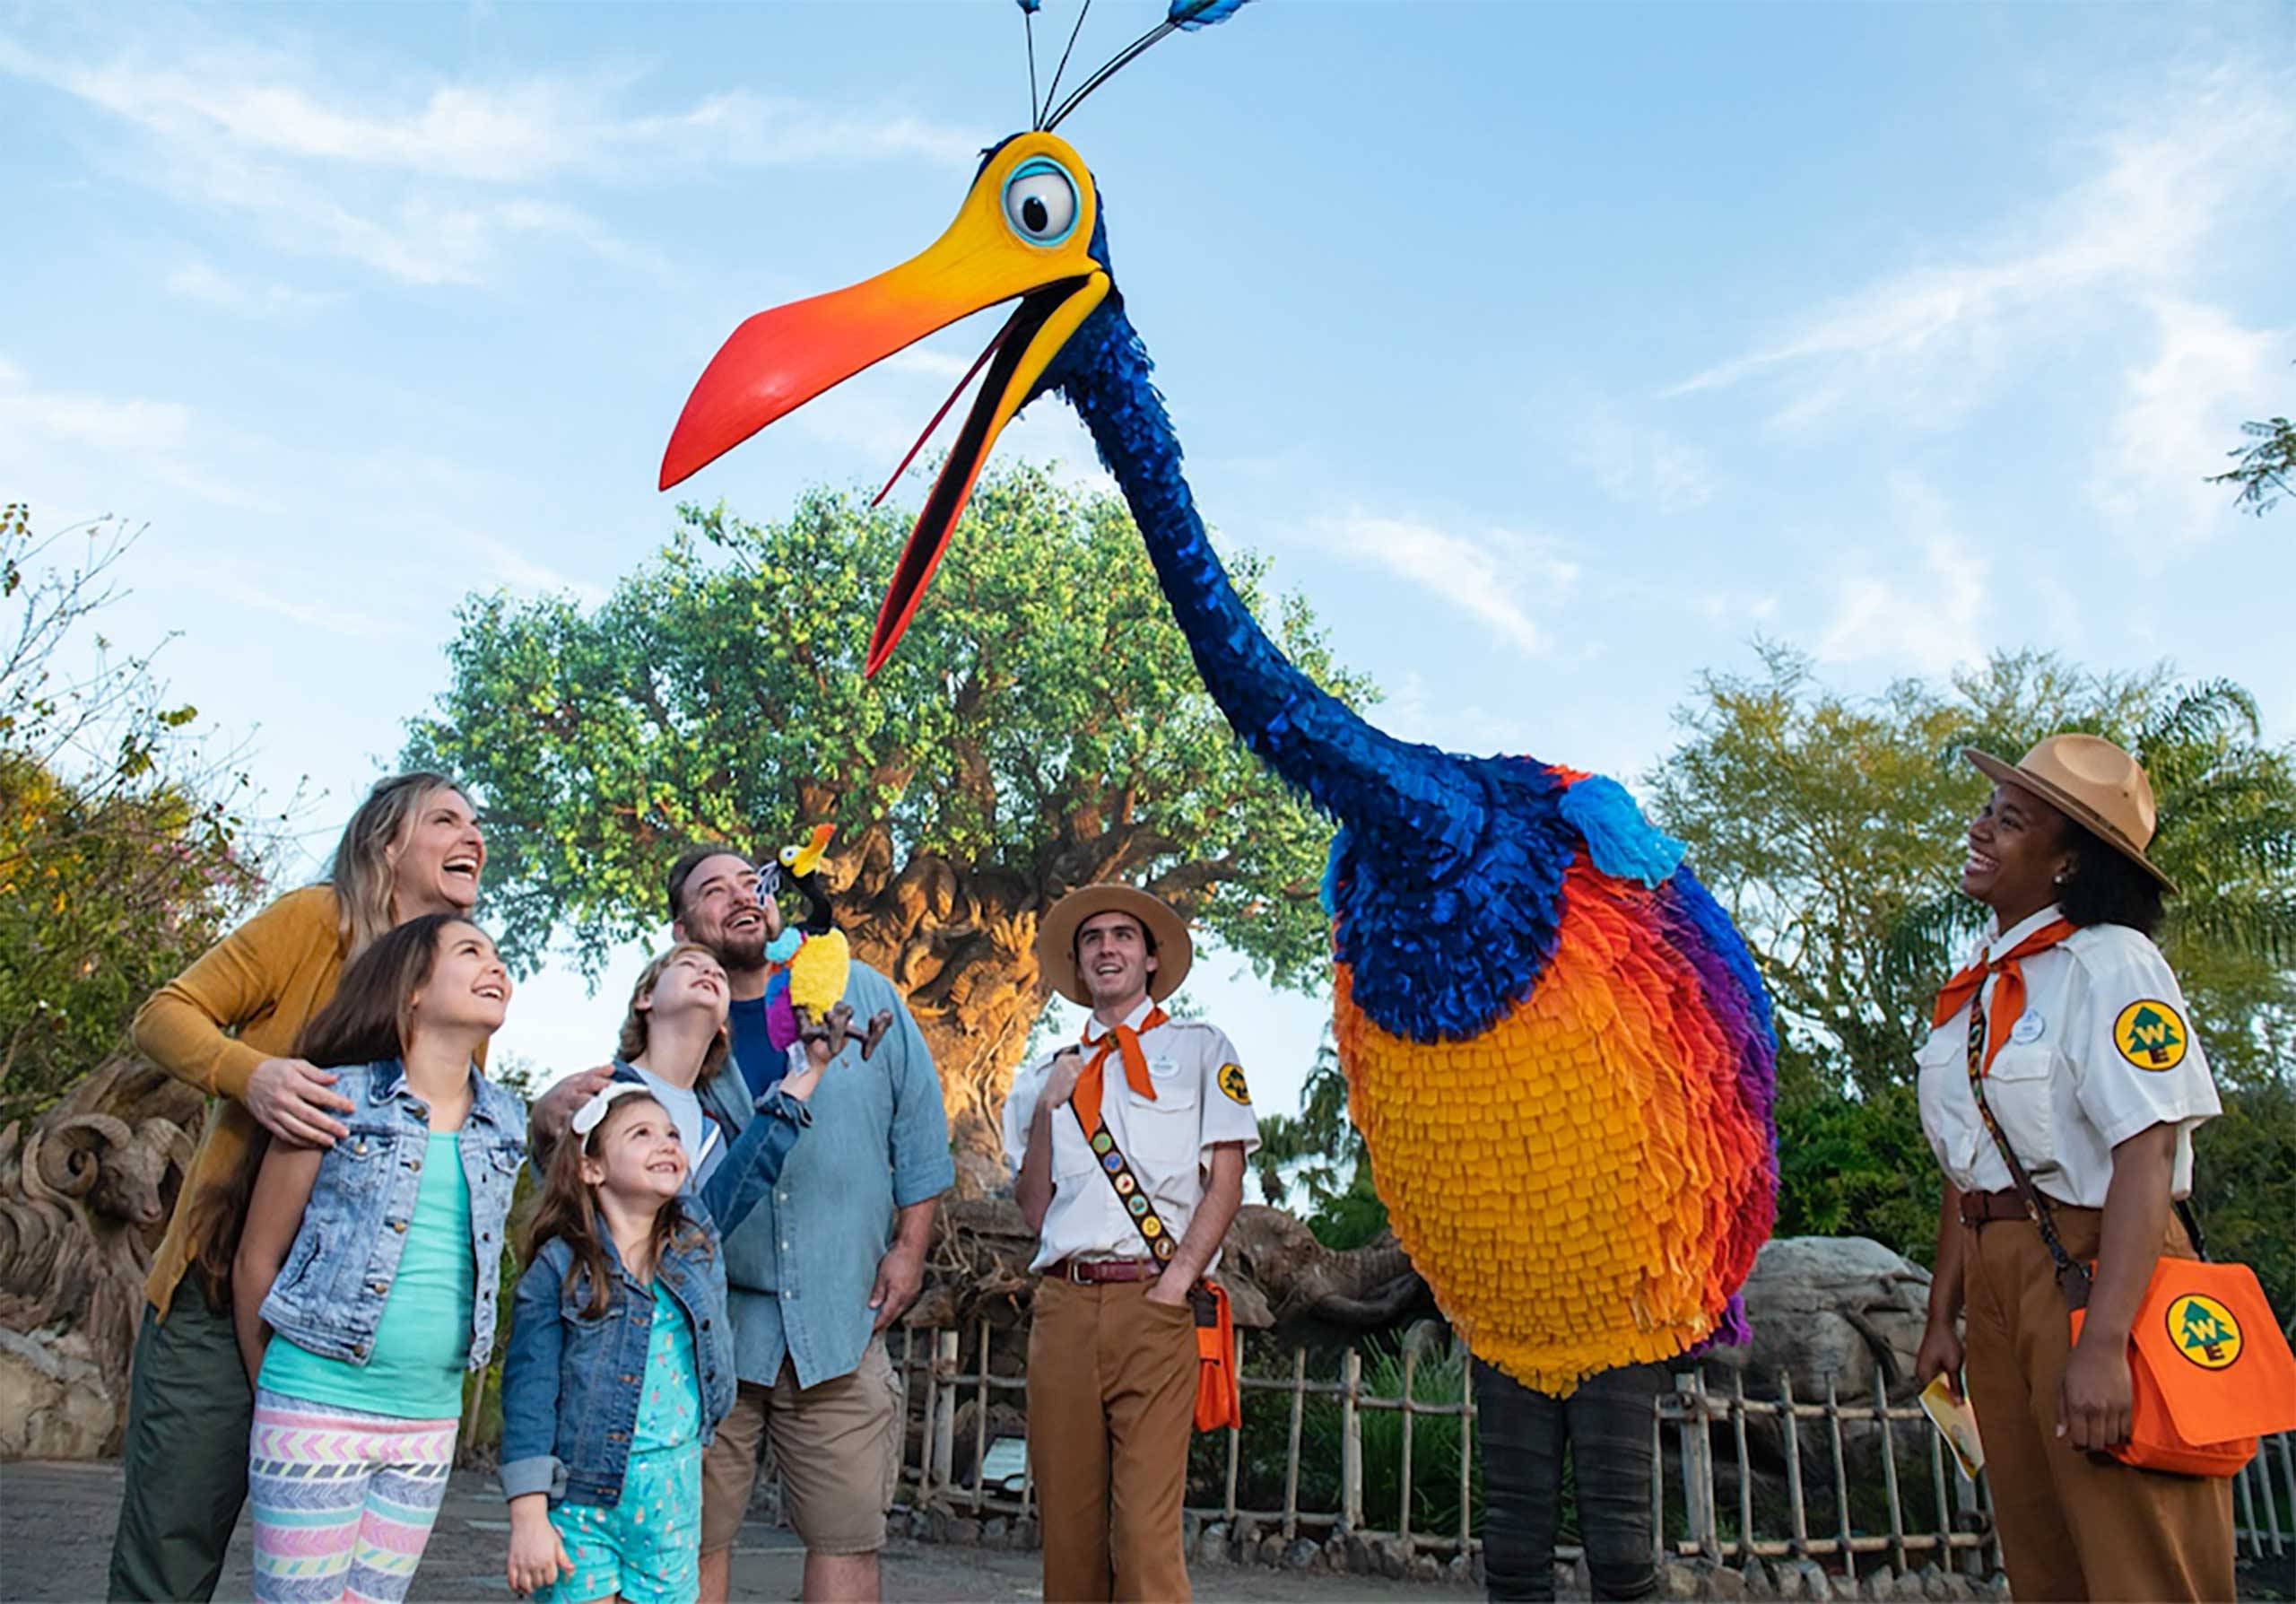 Kevin from Disney Pixar's Up! coming to Disney's Animal Kingdom in February